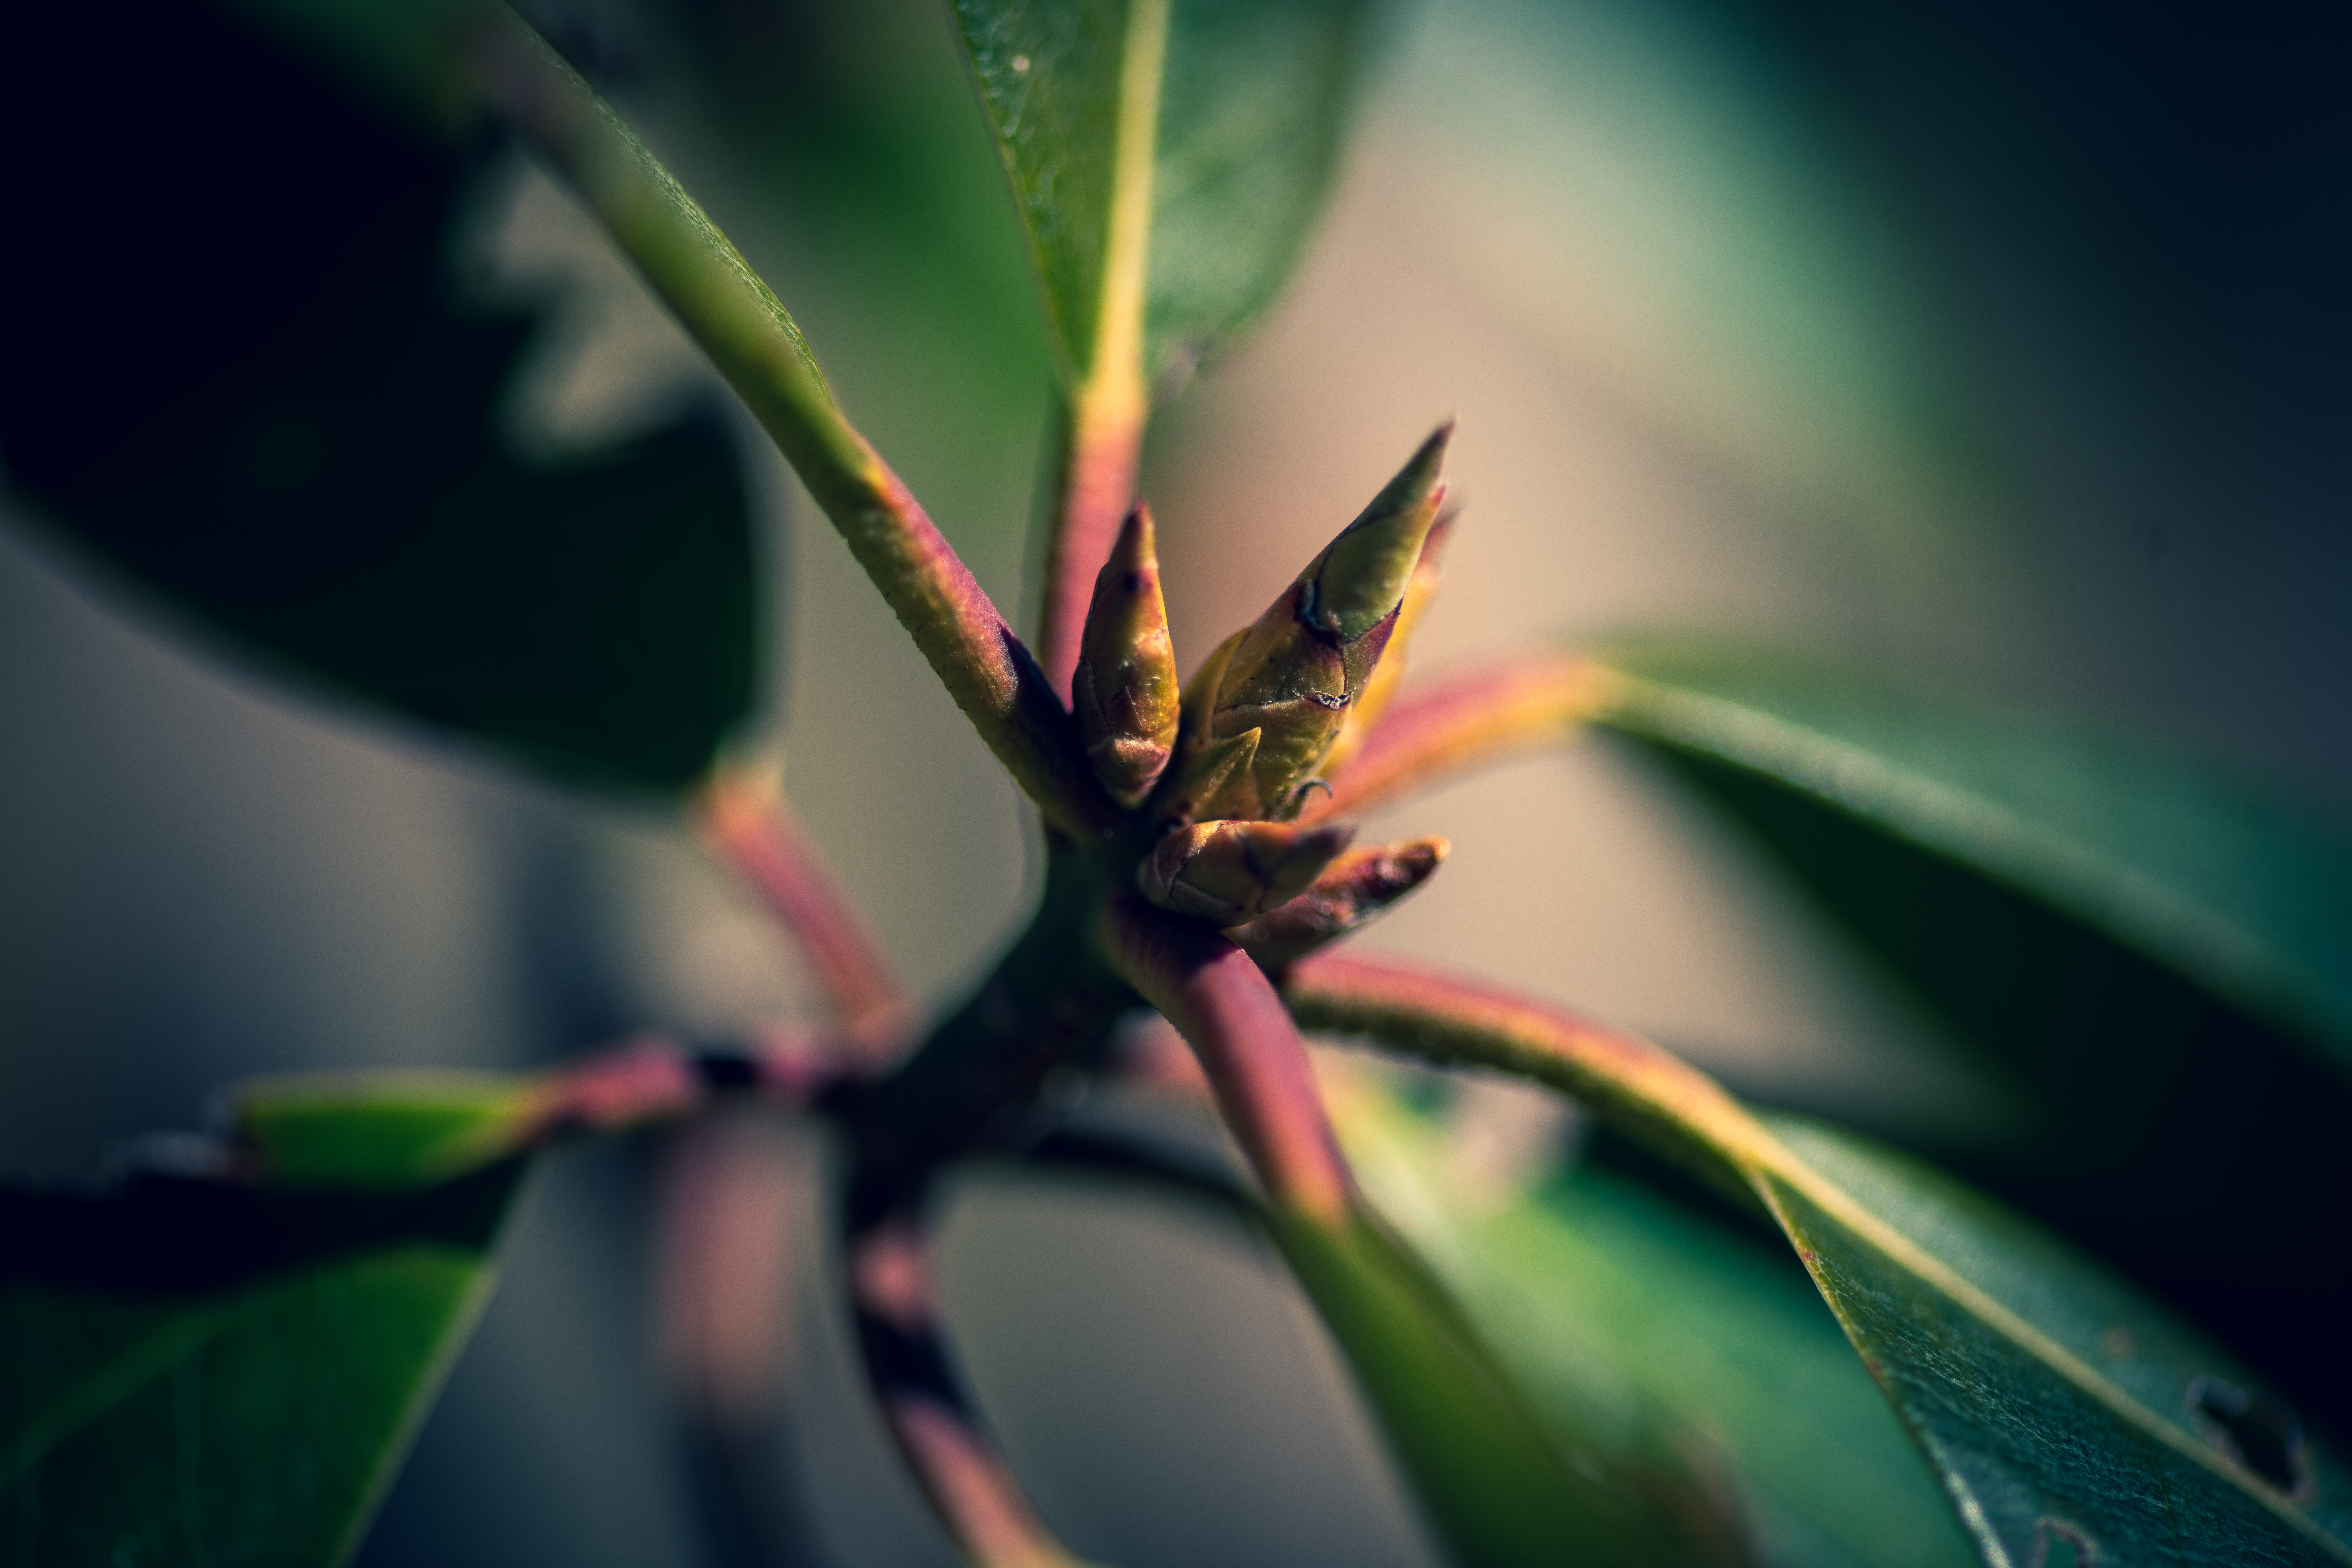 Rhododendron in waiting